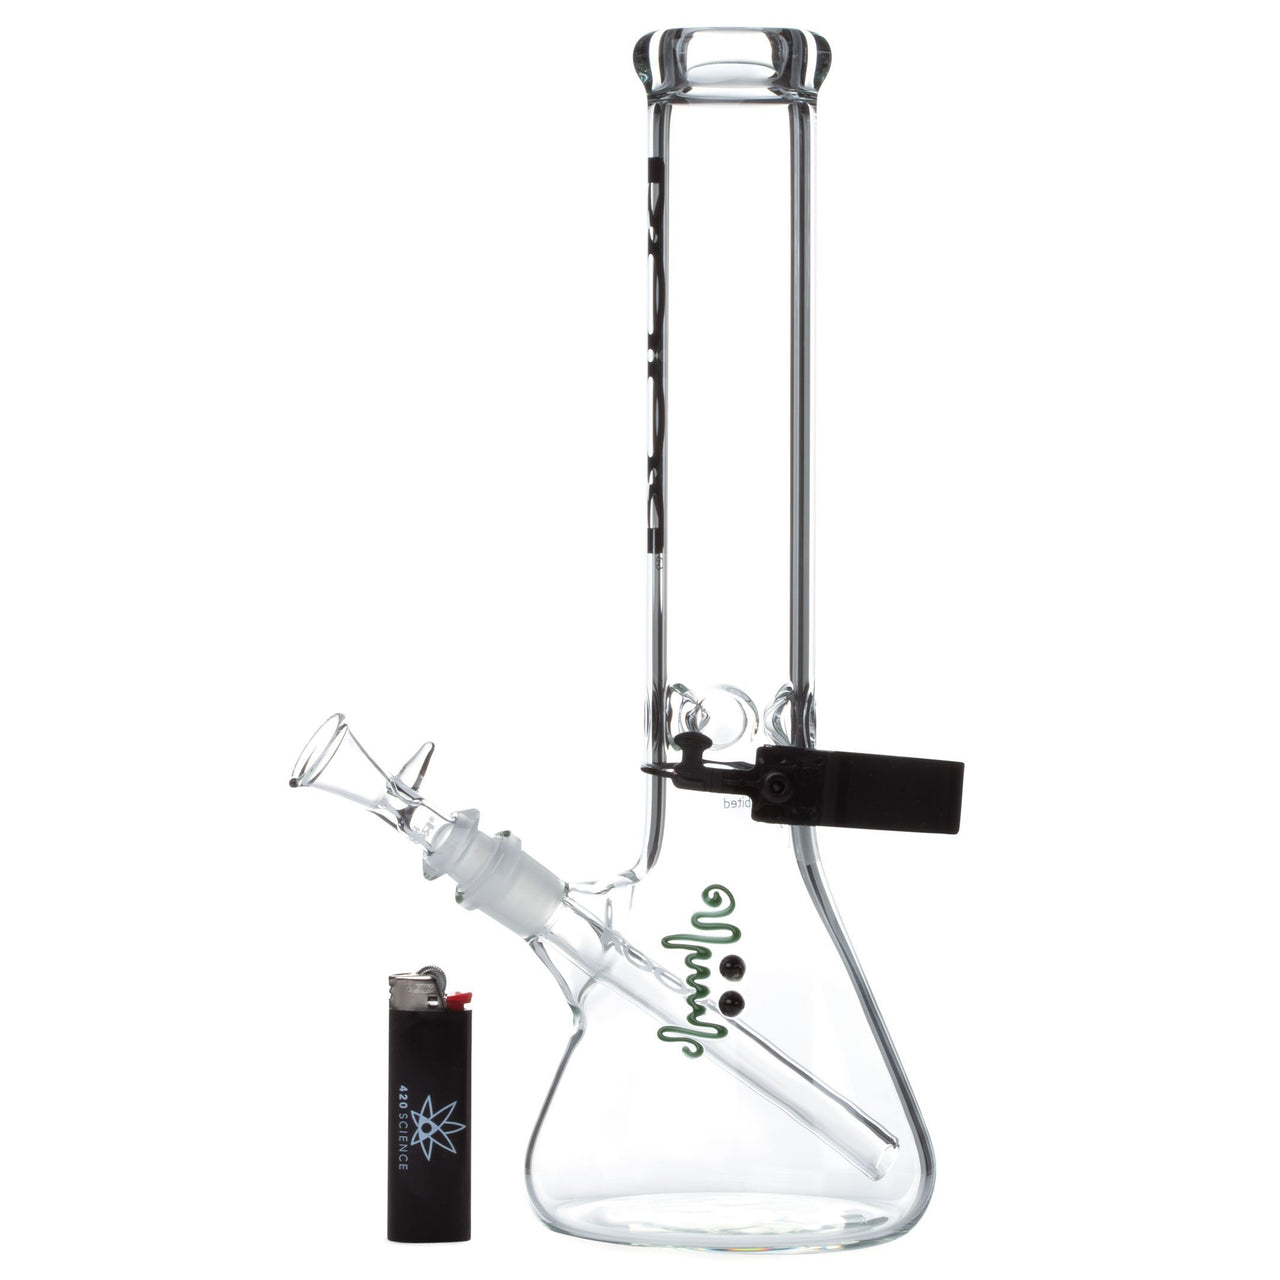 ROOR 14in Beaker 50x5mm - 420 Science - The most trusted online smoke shop.